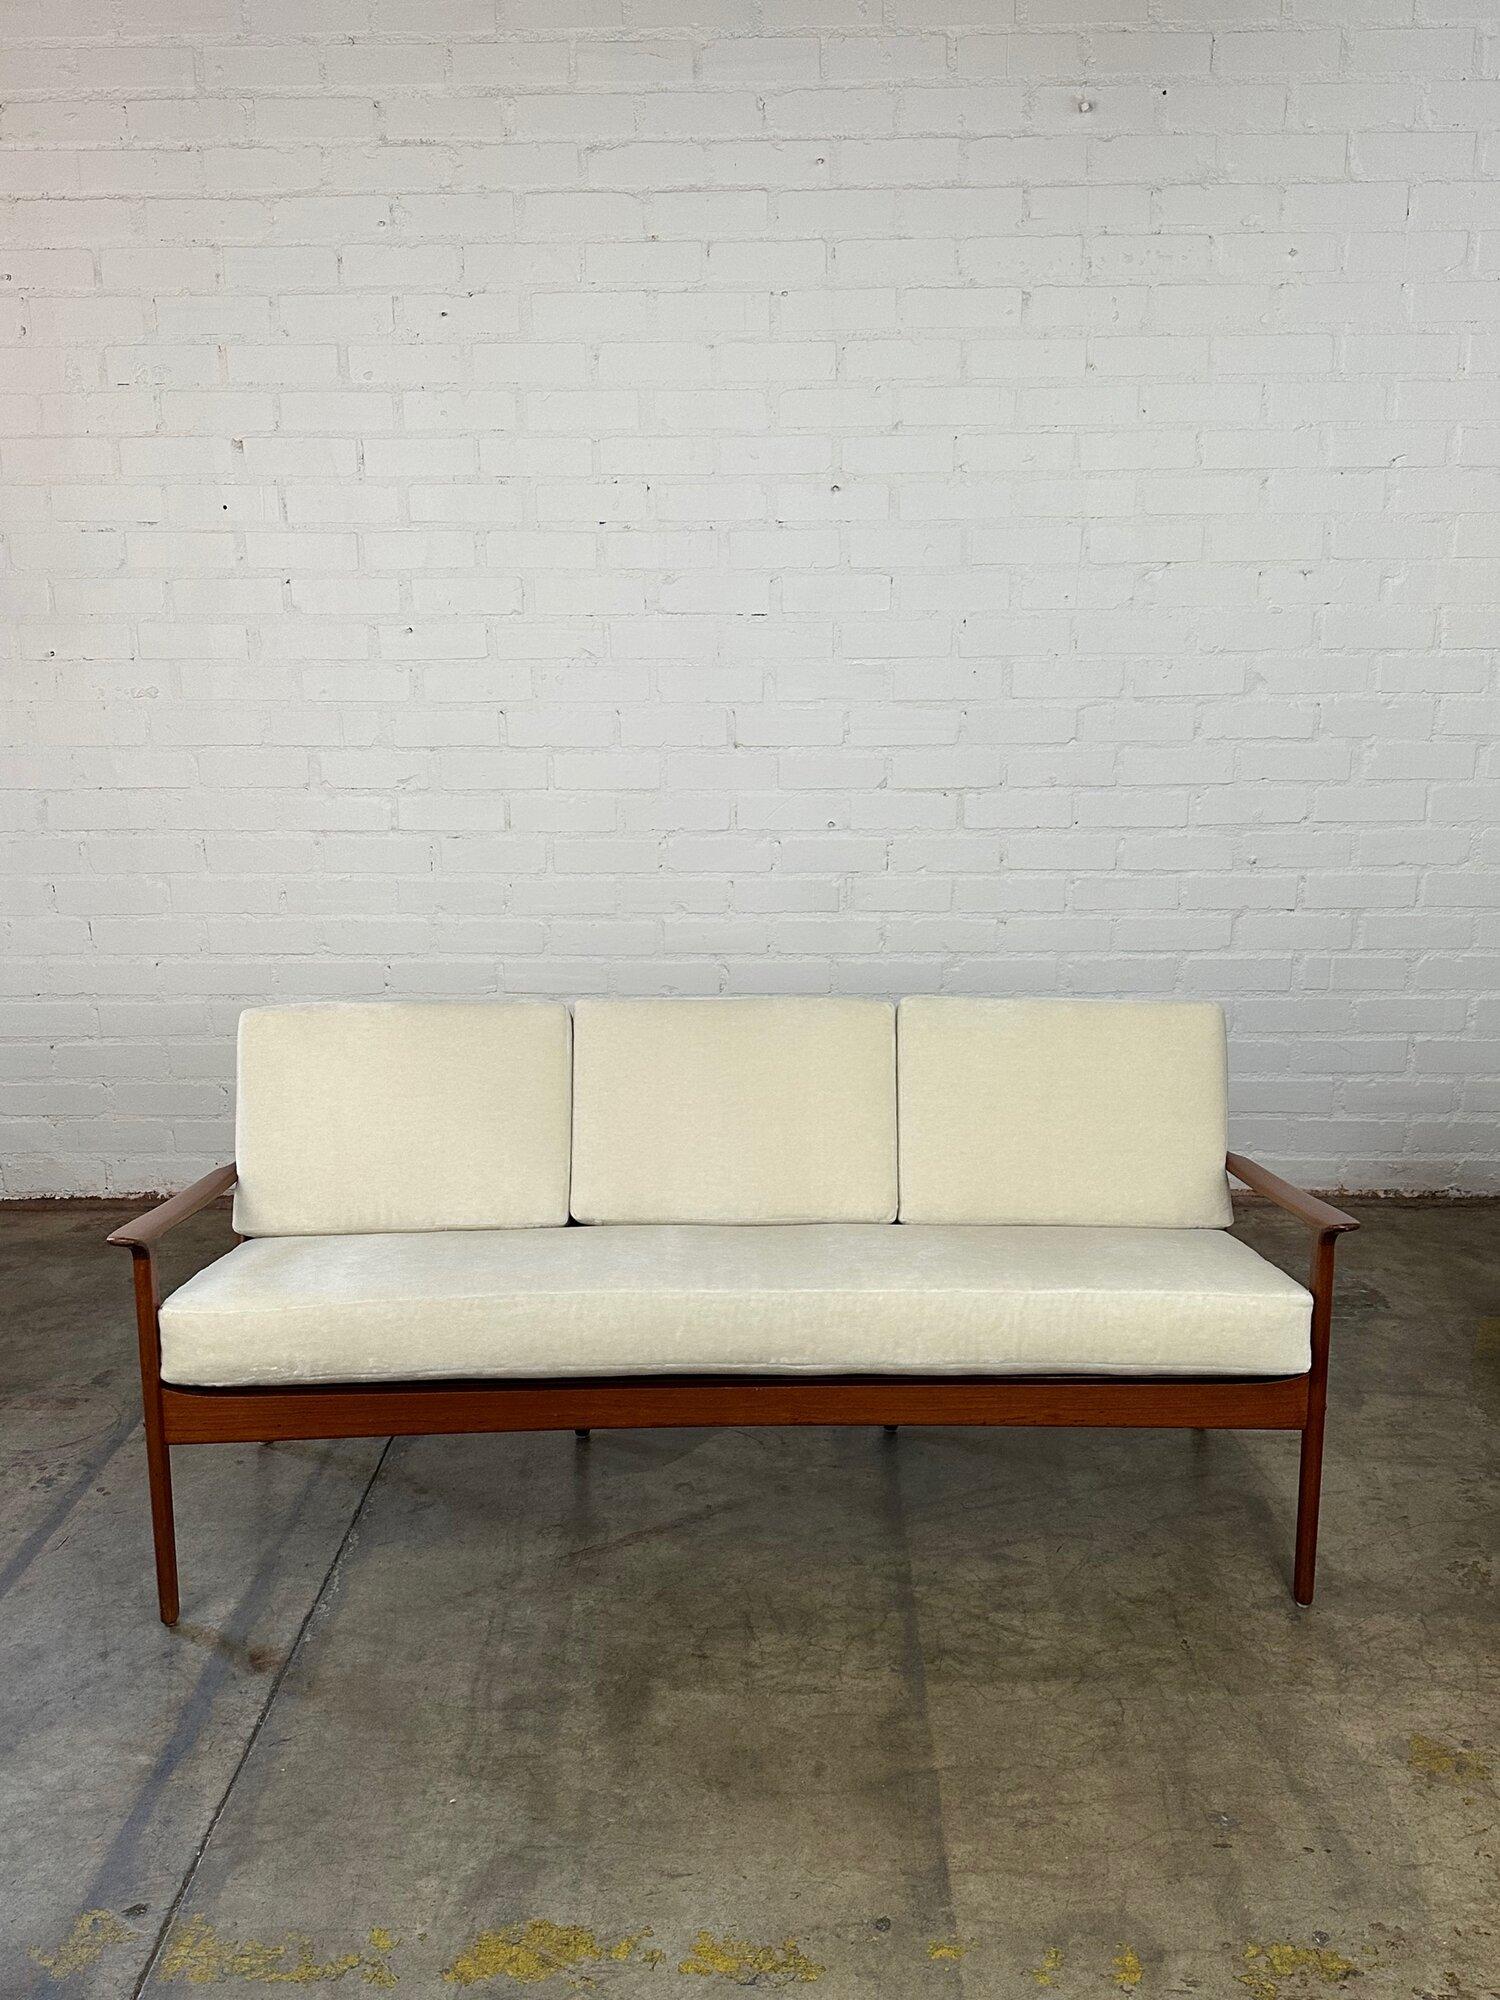 W71 D27 H30 SW65 SD18 SH20 AH24

Teak Danish Modern three seater sofa. Item has no major areas of wear and has been fully restored. Item features a solid teak refinished frame. Cushions have new foam and new off white mohair. Sofa is structurally